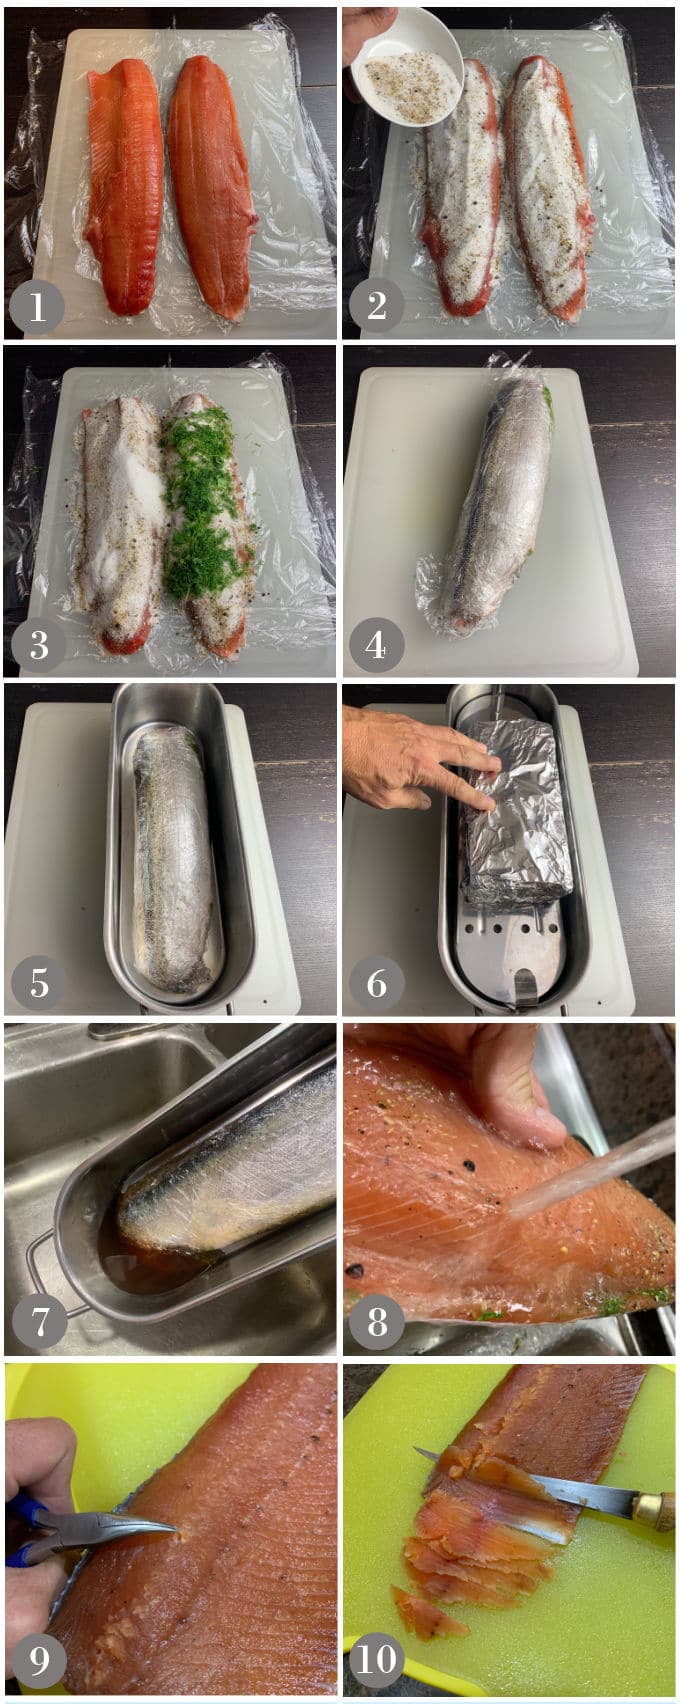 A collage of photos showing the steps to make homemade salt cured salmon or gravlax.